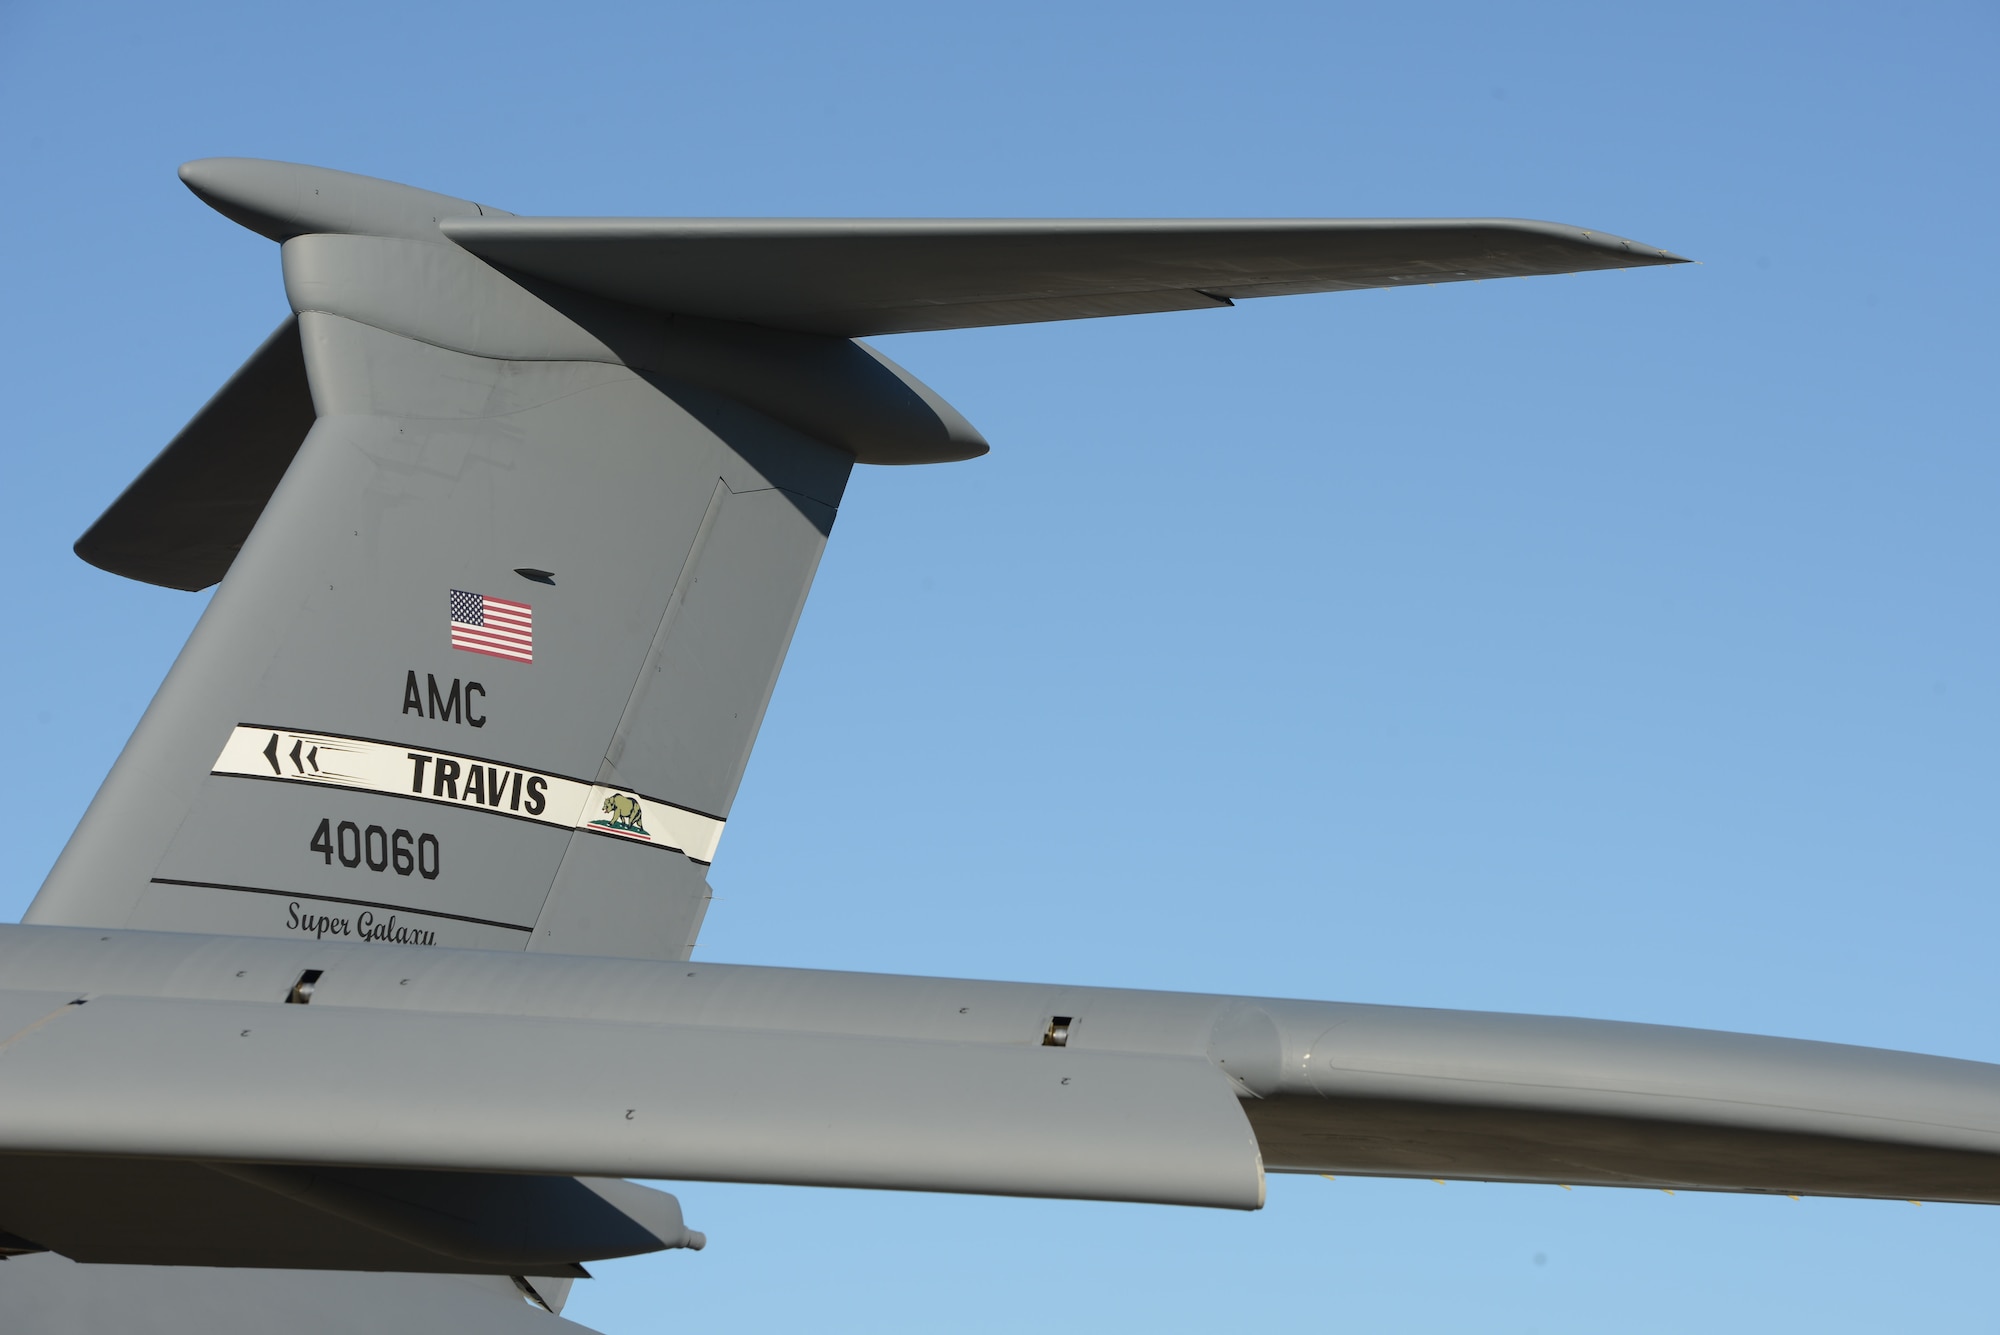 The tail of an Air Force C-5 Super Galaxy at Travis Air Force Base, Calif. Travis aircraft, like the C-5 seen here, support the USS Ronald Reagan, delivering parts and supplies by air when requested. (U.S. Navy photo/Chief Mass Communication Specialist Xander Gamble/Released)